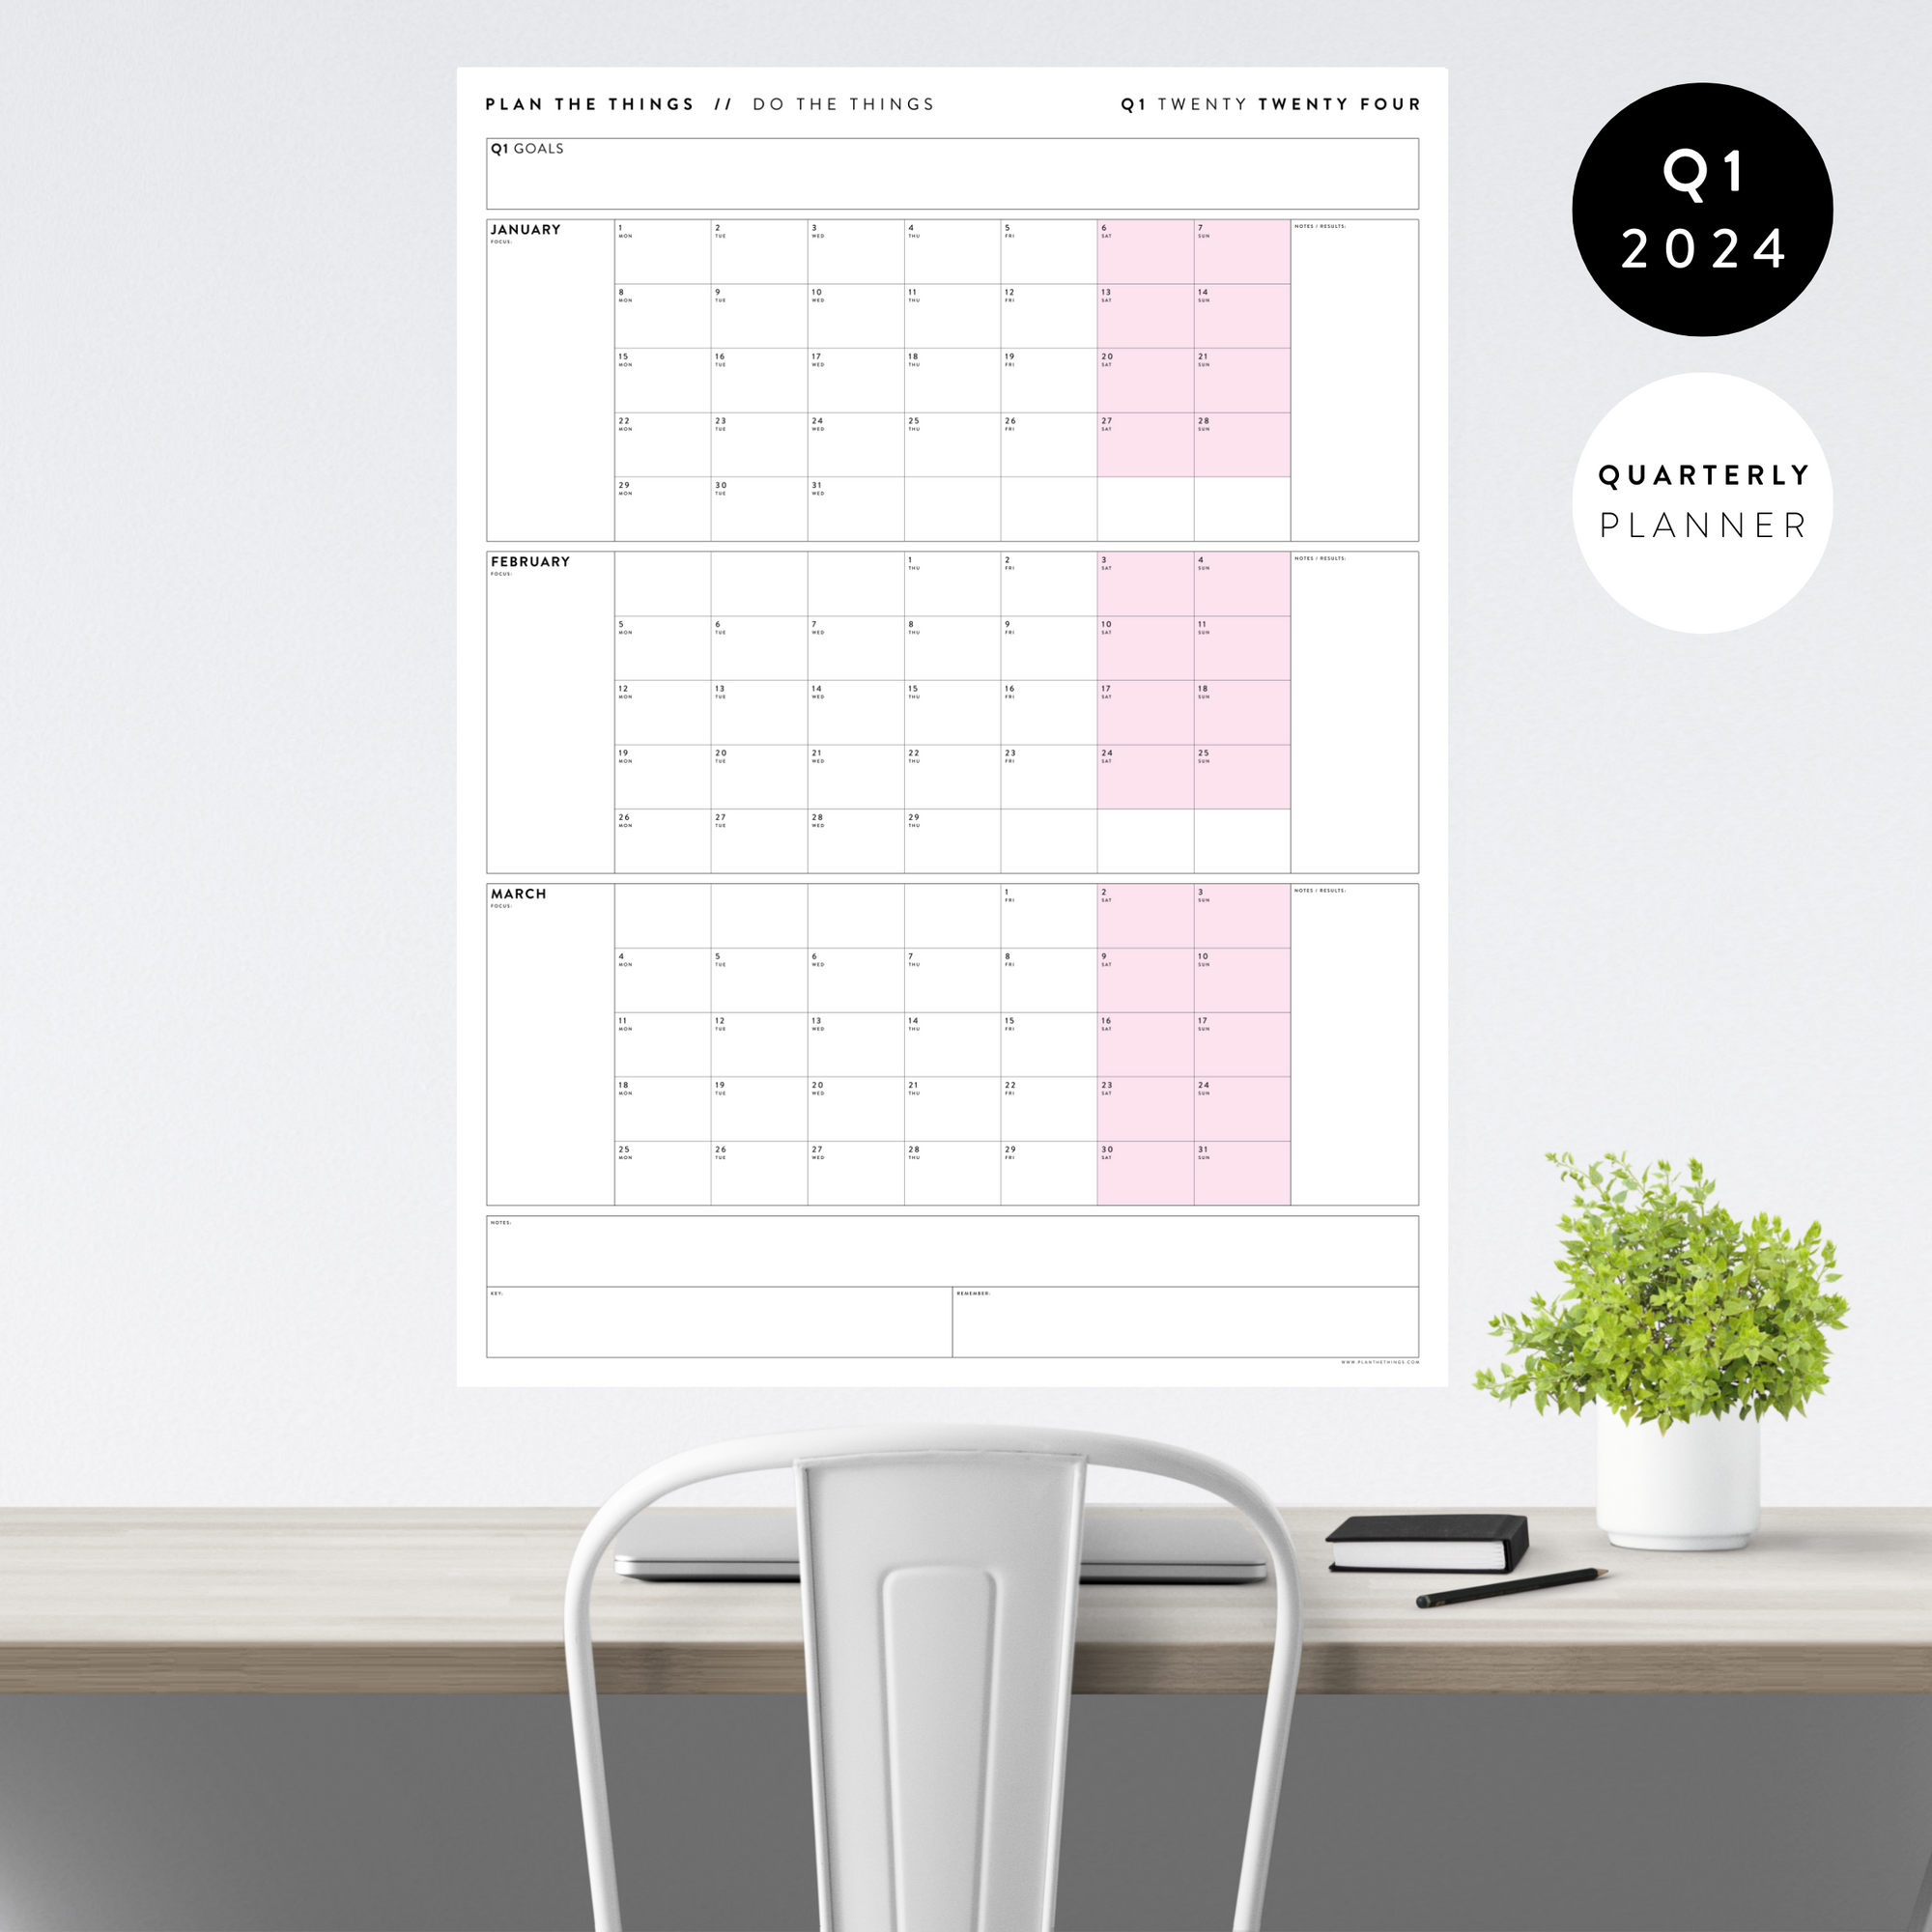 Q1 2024 QUARTERLY GIANT WALL CALENDAR (JANUARY - MARCH 2024) - PINK WEEKENDS